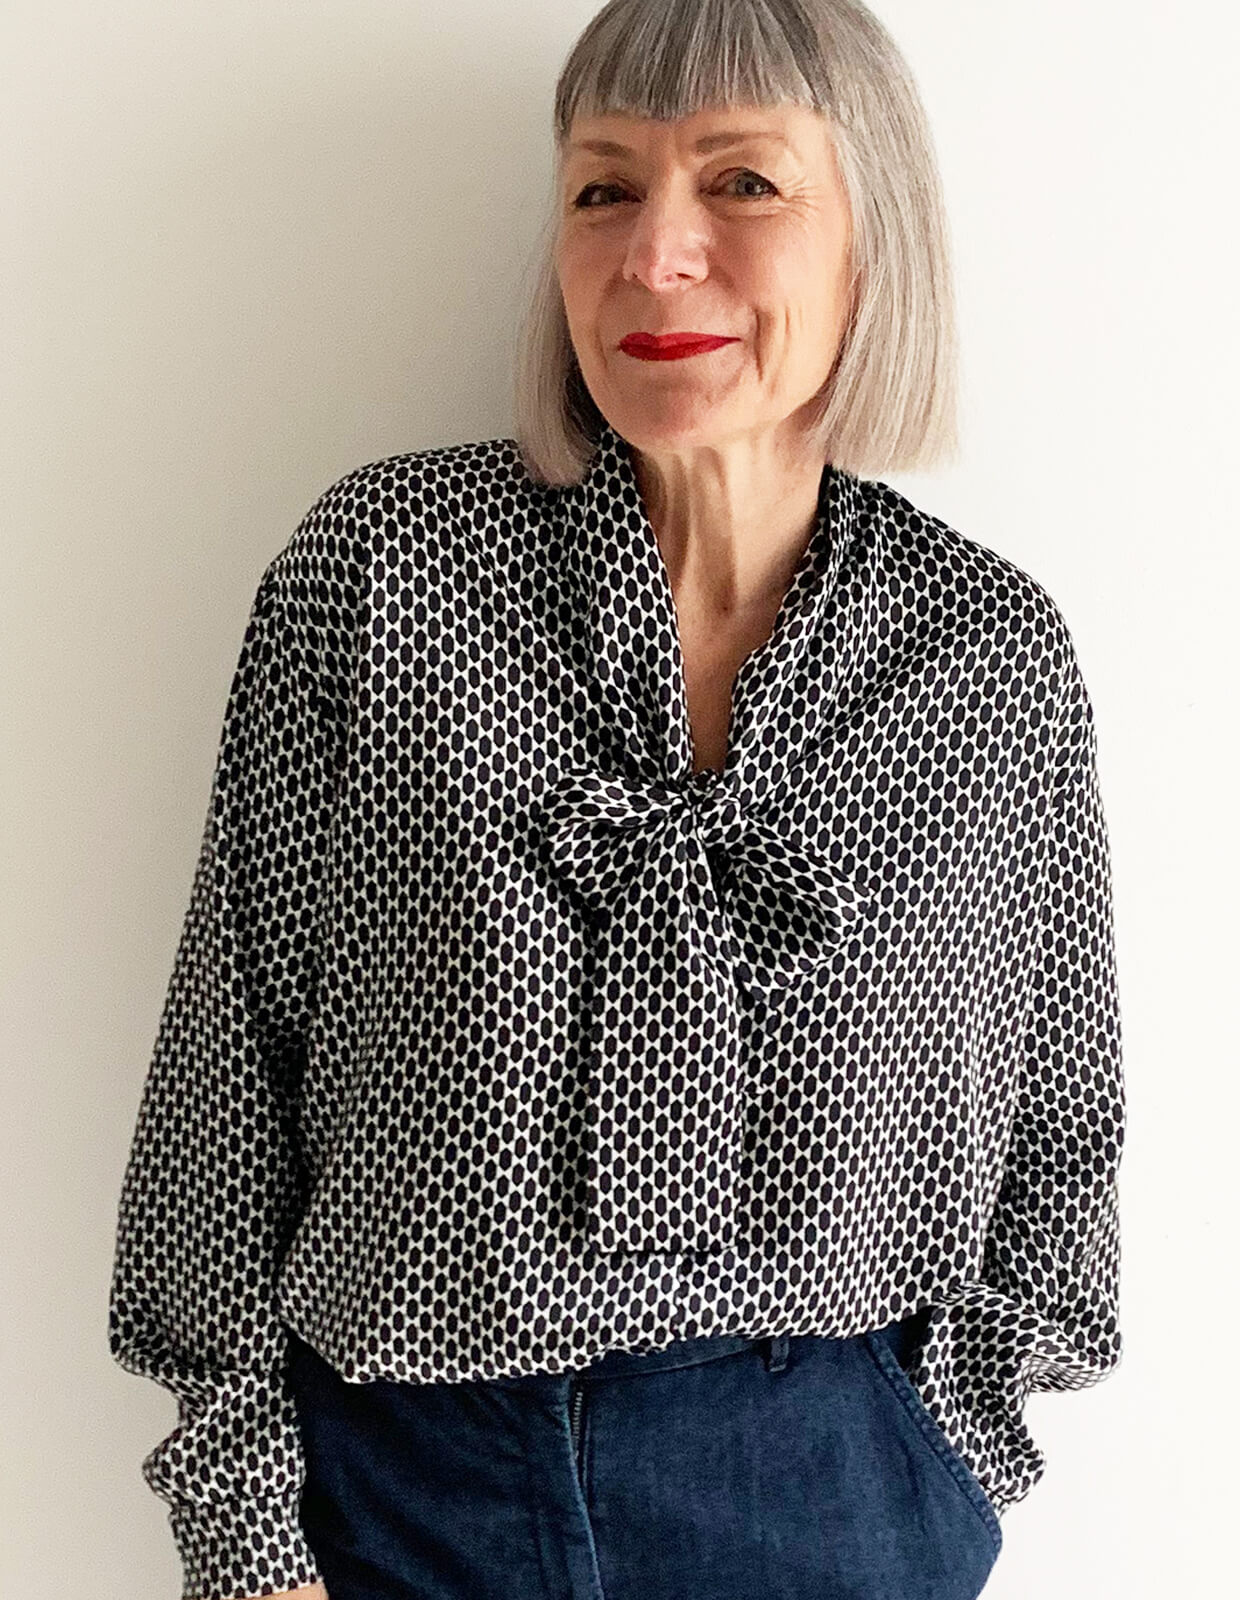 Woman wearing the Tie Front Blouse sewing pattern from The Maker's Atelier on The Fold Line. A blouse pattern made in silk, Tencel, viscose, fine cotton or Tana lawn fabrics, featuring cuffed sleeves with button closure, relaxed fit, pussy bow neck tie, front button closure and slightly dropped shoulders.